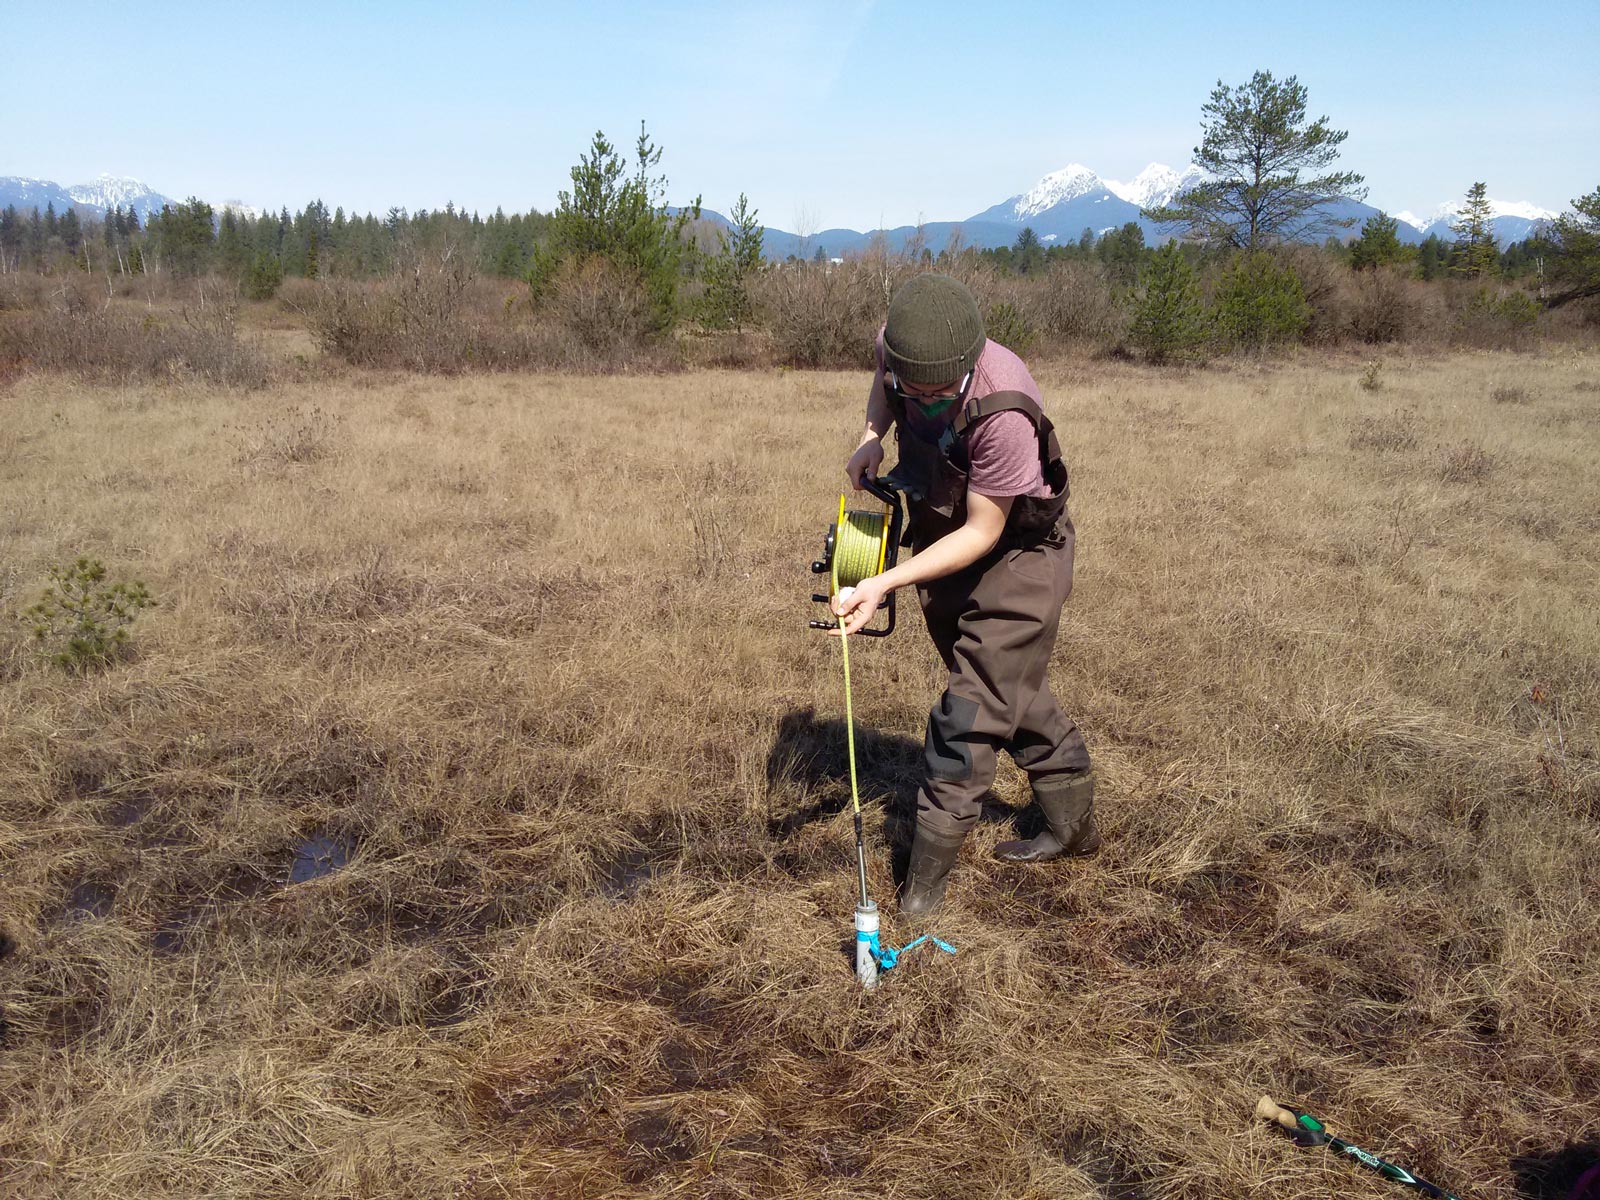 As part of its monitoring program, the LEPS Wetland Crew installs and checks water level meters in Metro Vancouver parks. (Photo: Langley Environmental Partners Society)